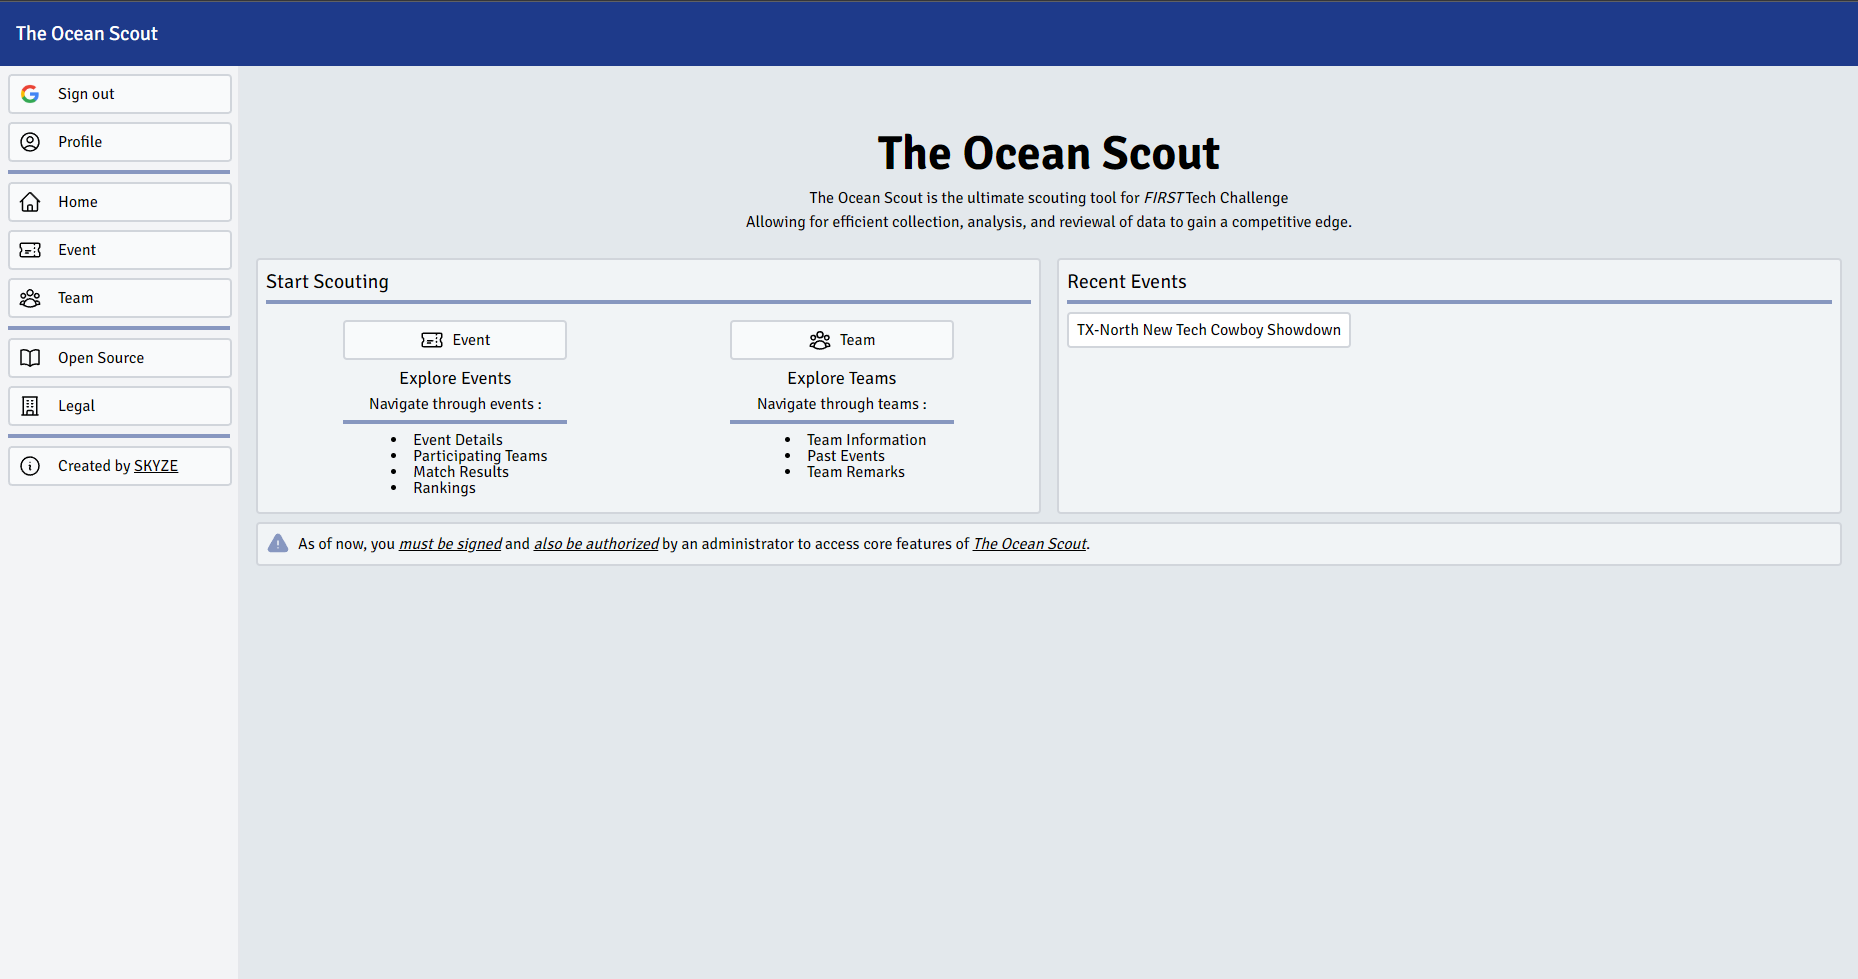 The Ocean Scout